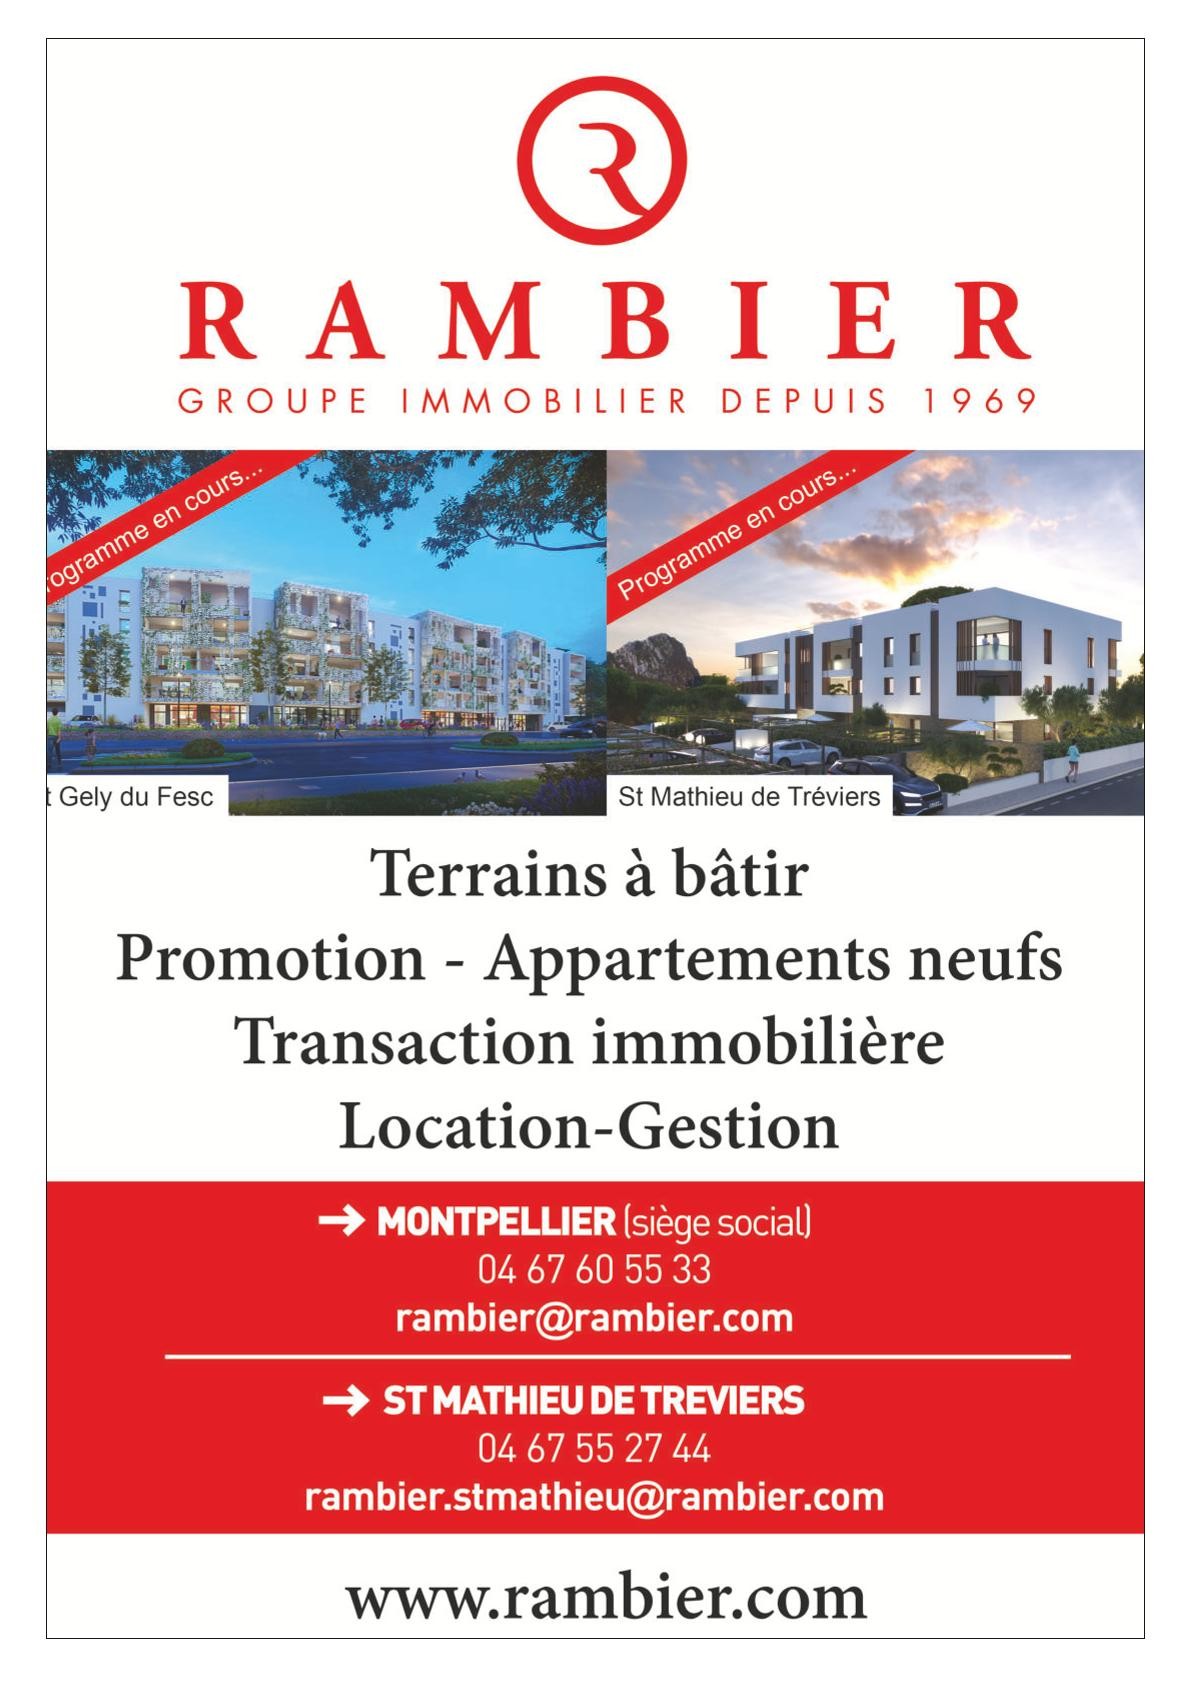 Rambier Immobilier